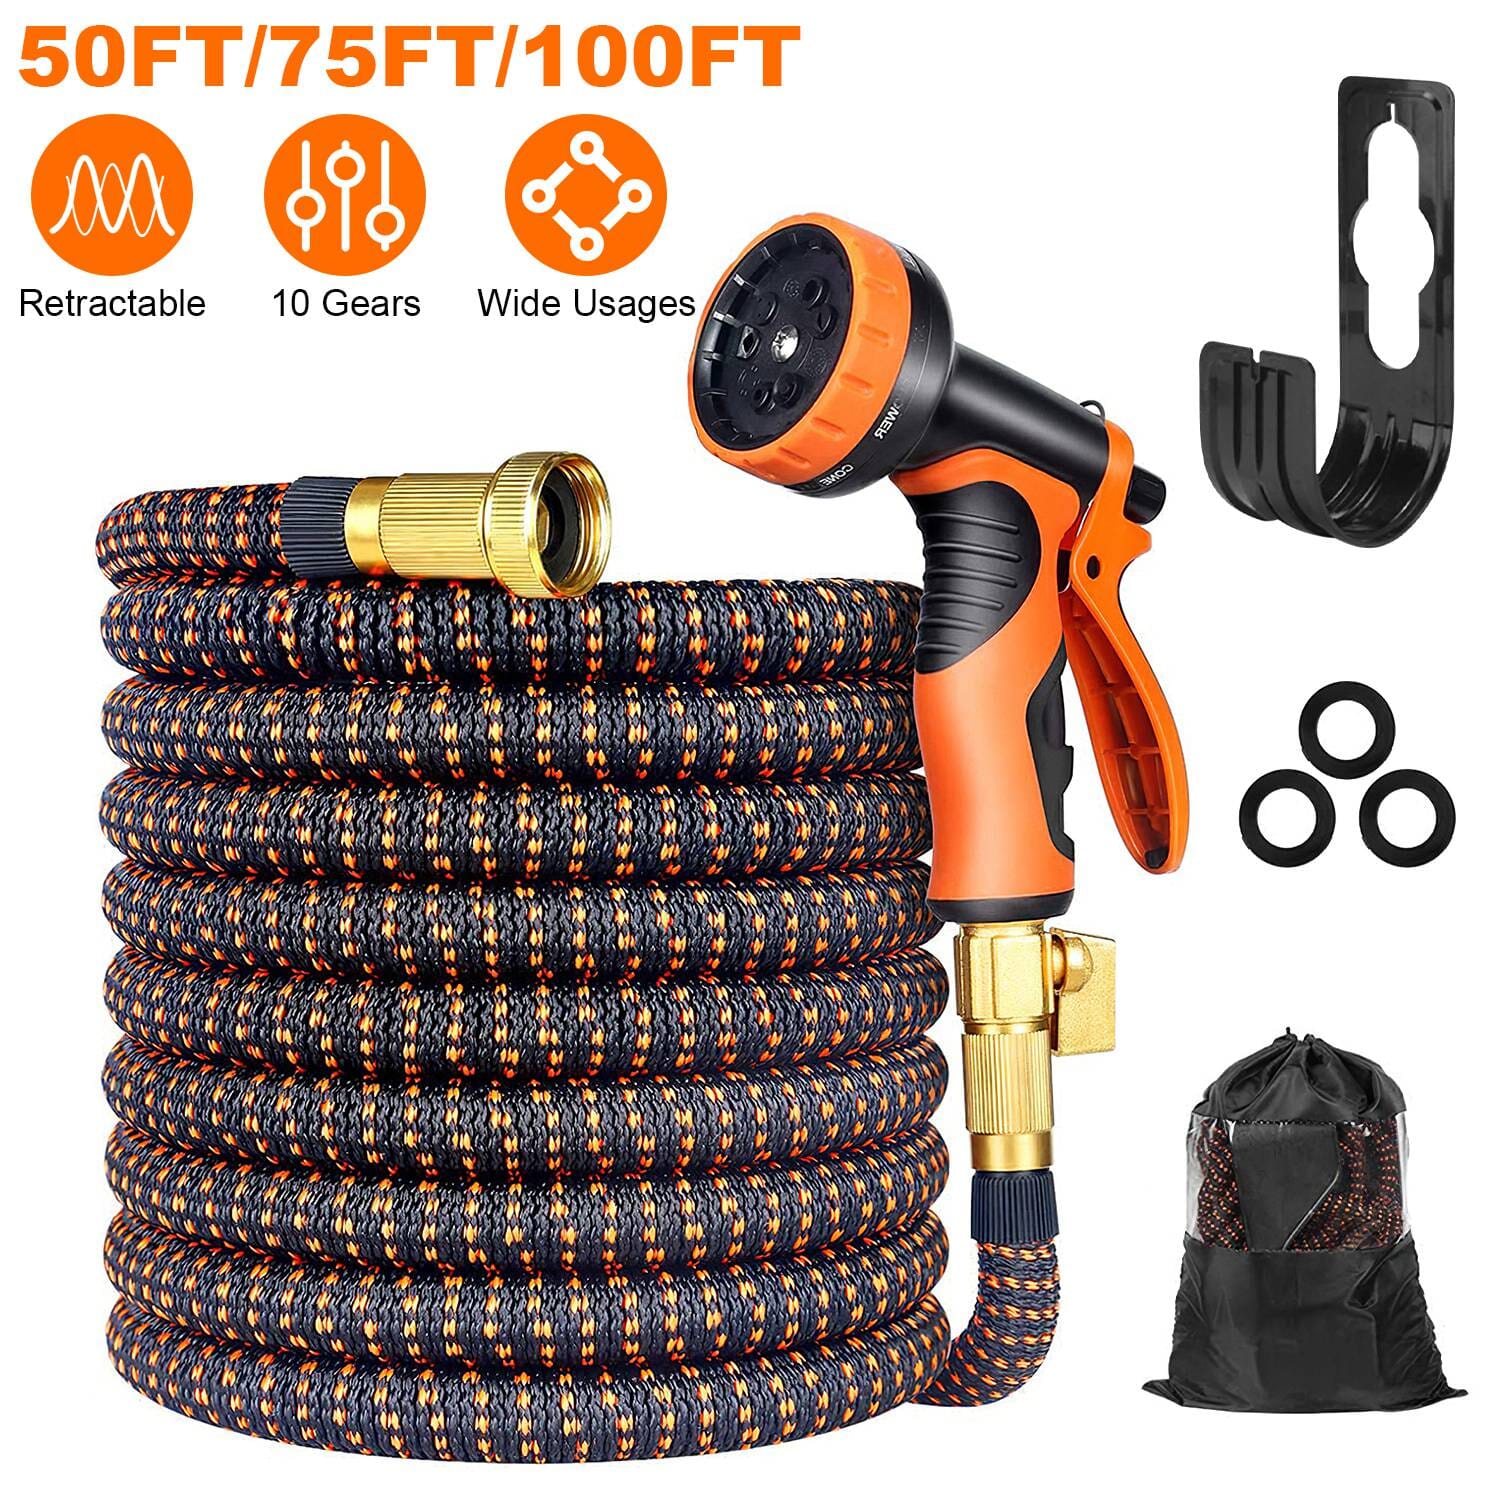 Garden Hose Watering Kit with Spray Nozzle